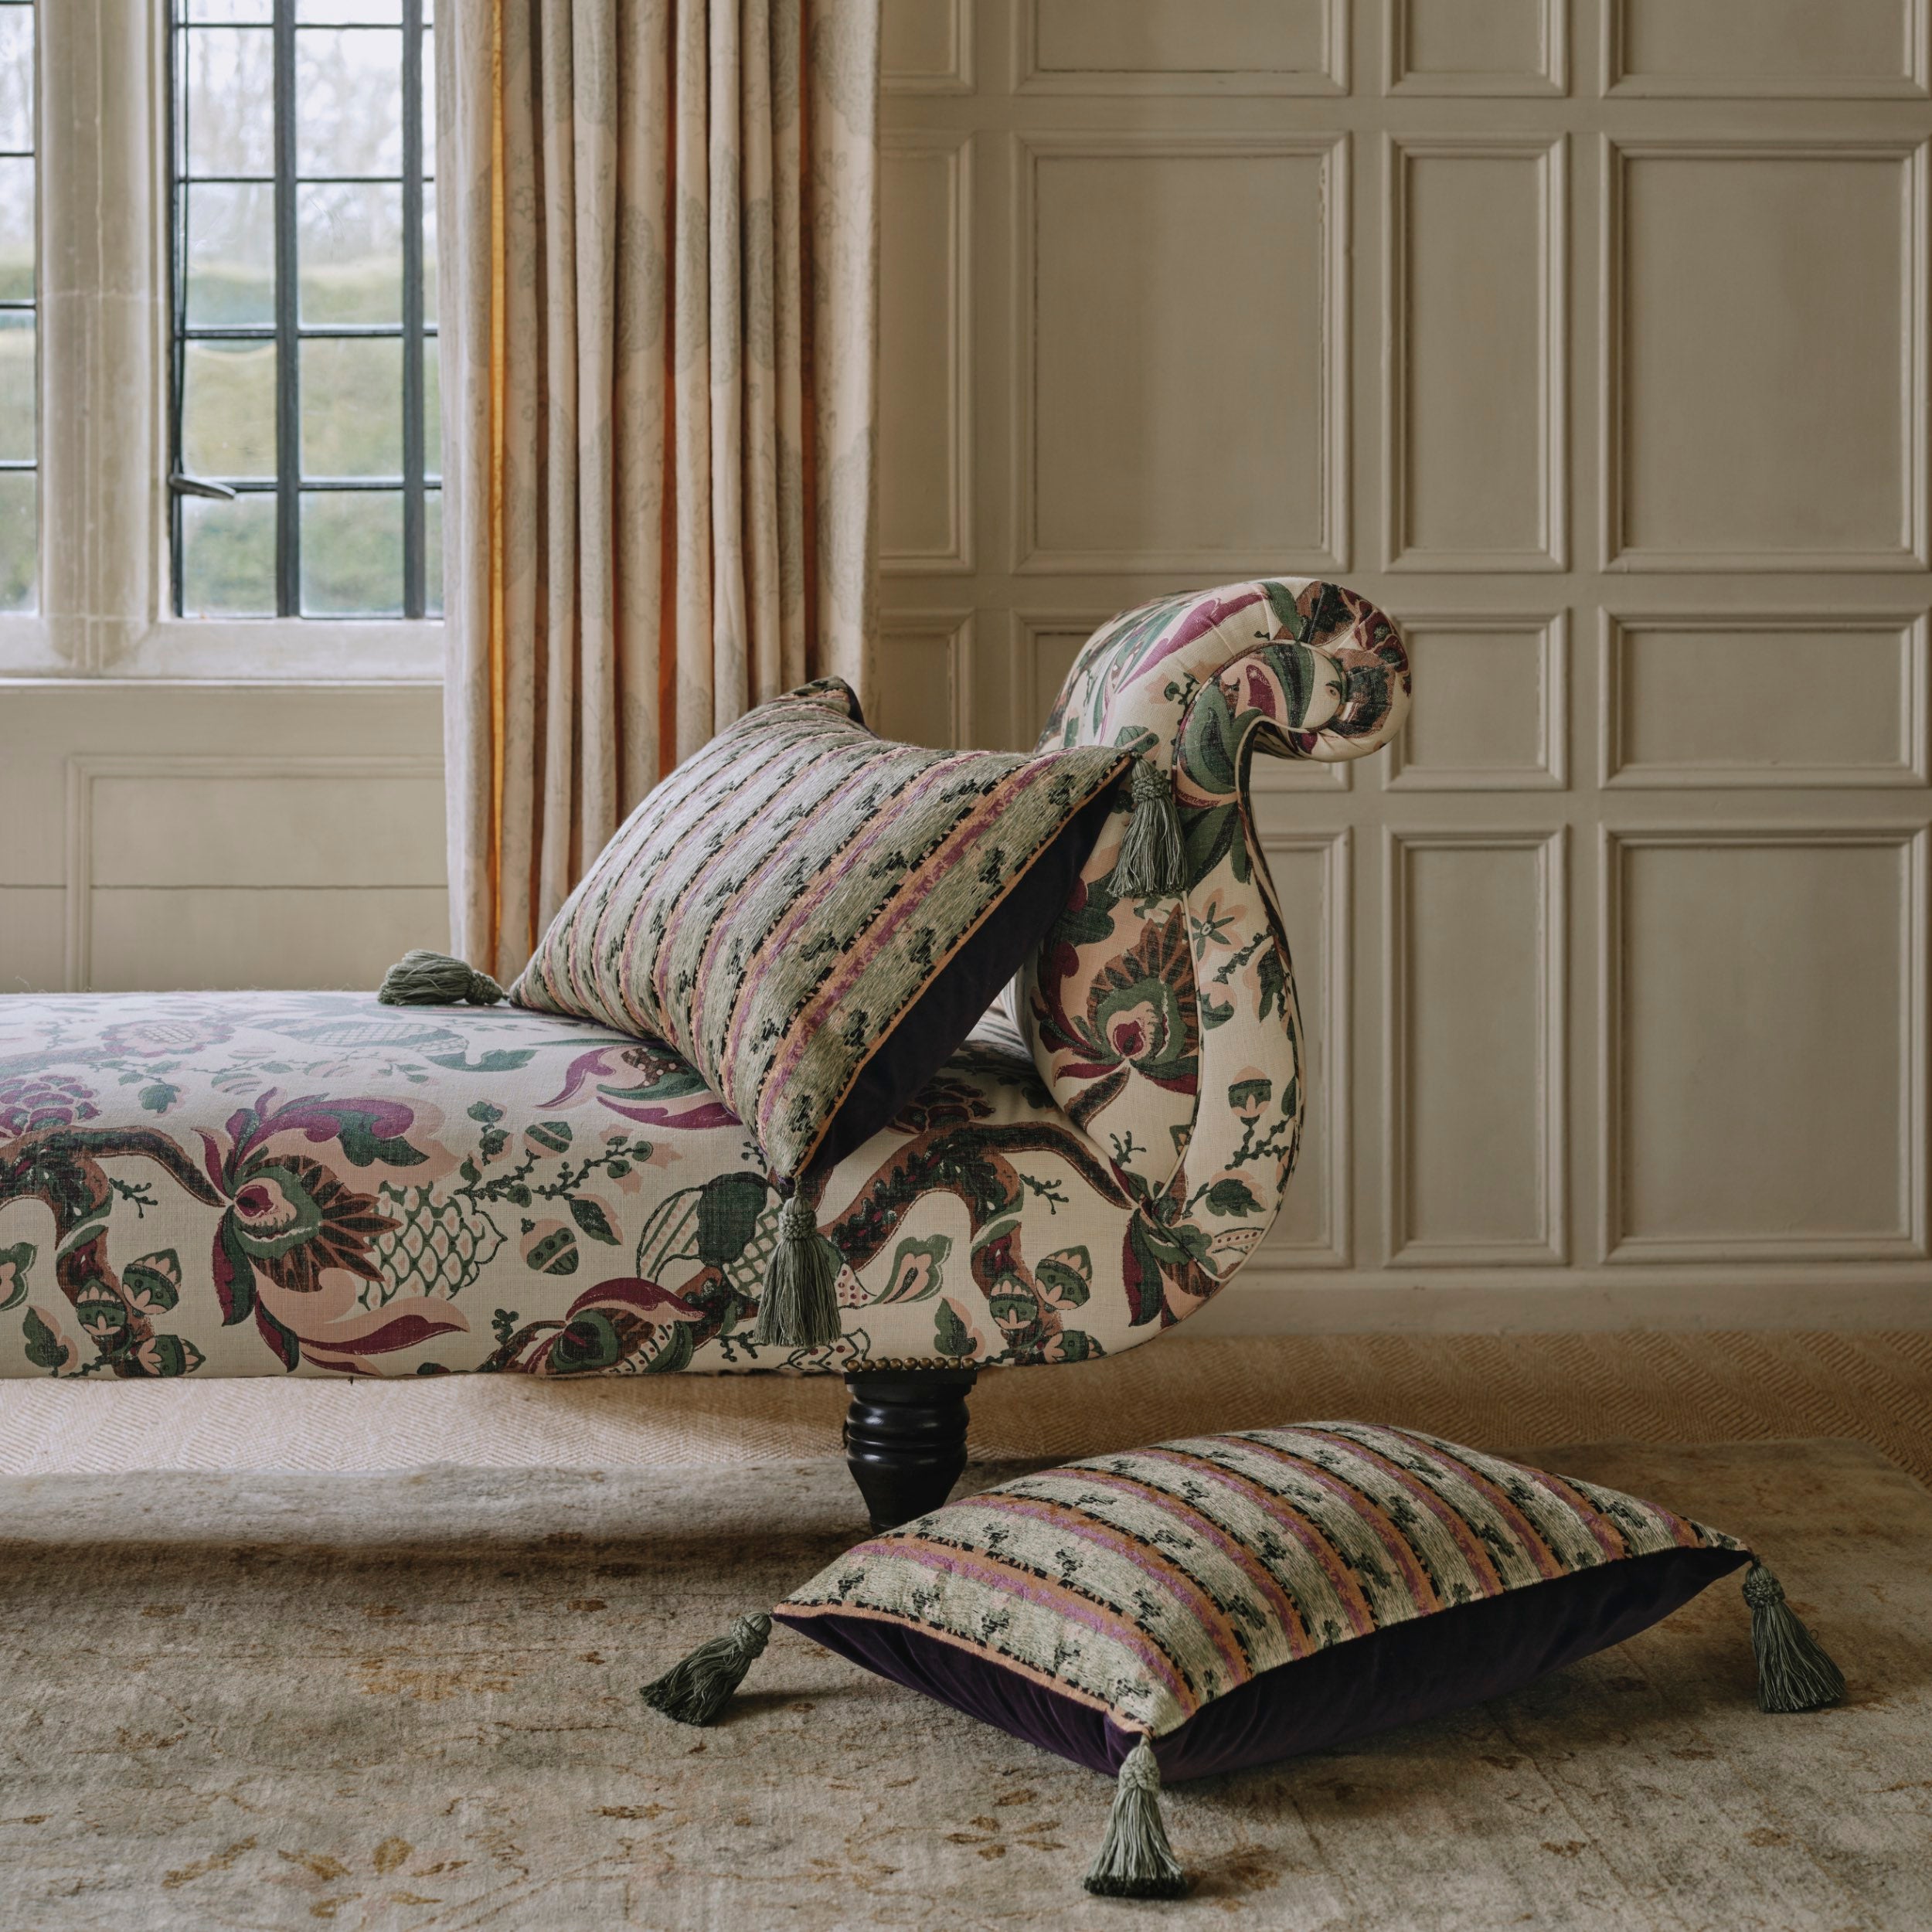 An Early Victorian Chatsworth Chaise Longue in Flora Soames Cornucopia Pair Available